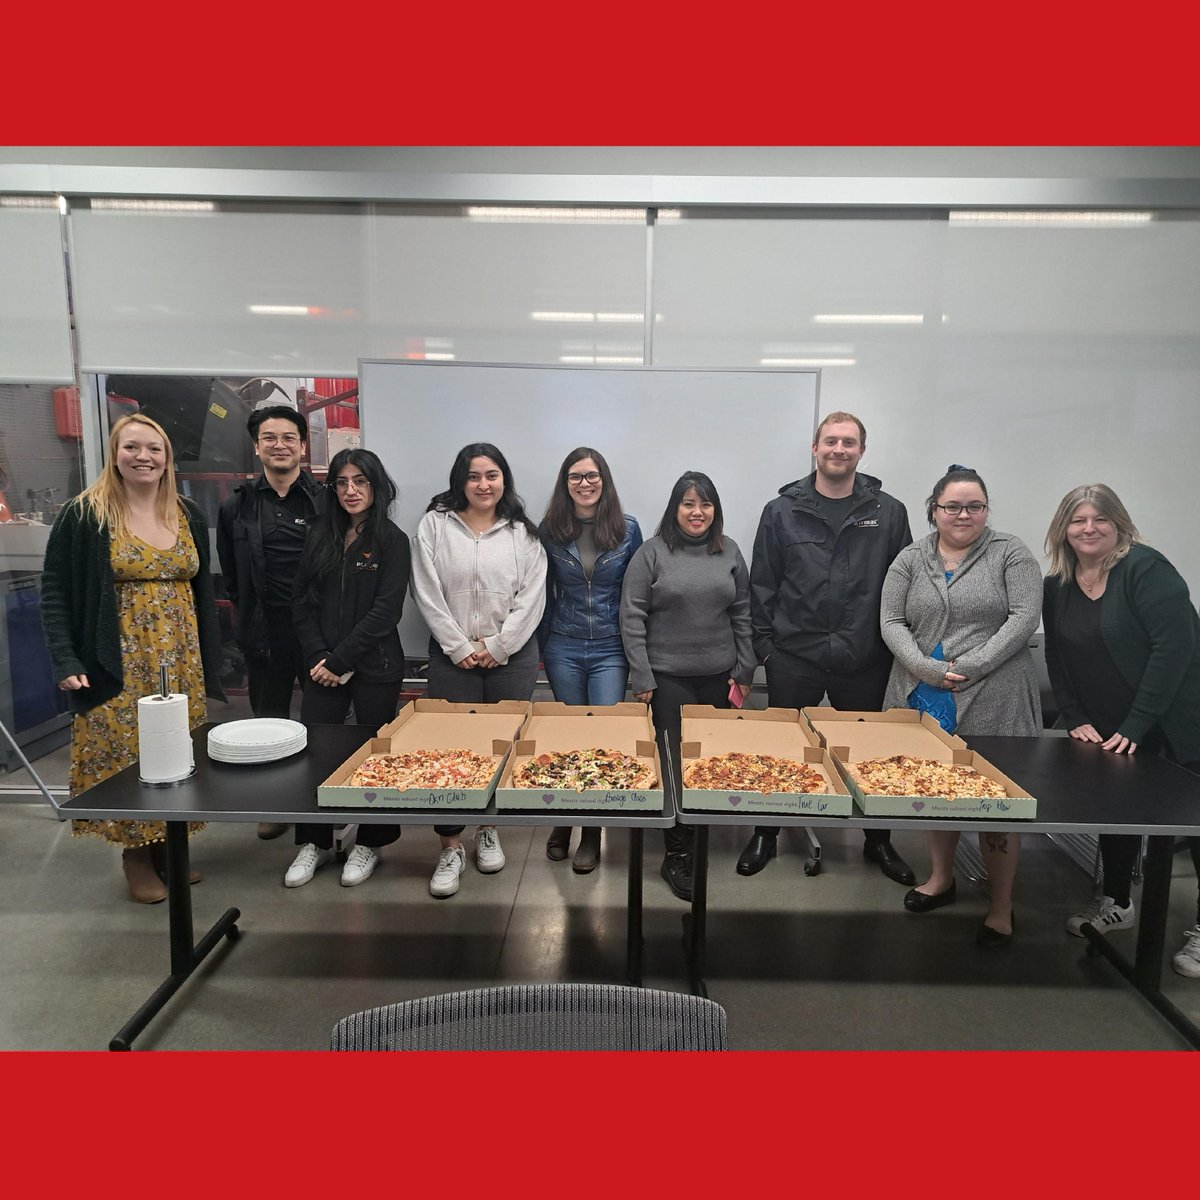 Wrapping up our latest new hire training with a slice of success! 🍕🎉 . . . . . #TrainingComplete #PizzaFuel #kirmaccollision #kirmaccommunity #learning #growing #pizzaparty #werehiring #newhires #loveyourjob